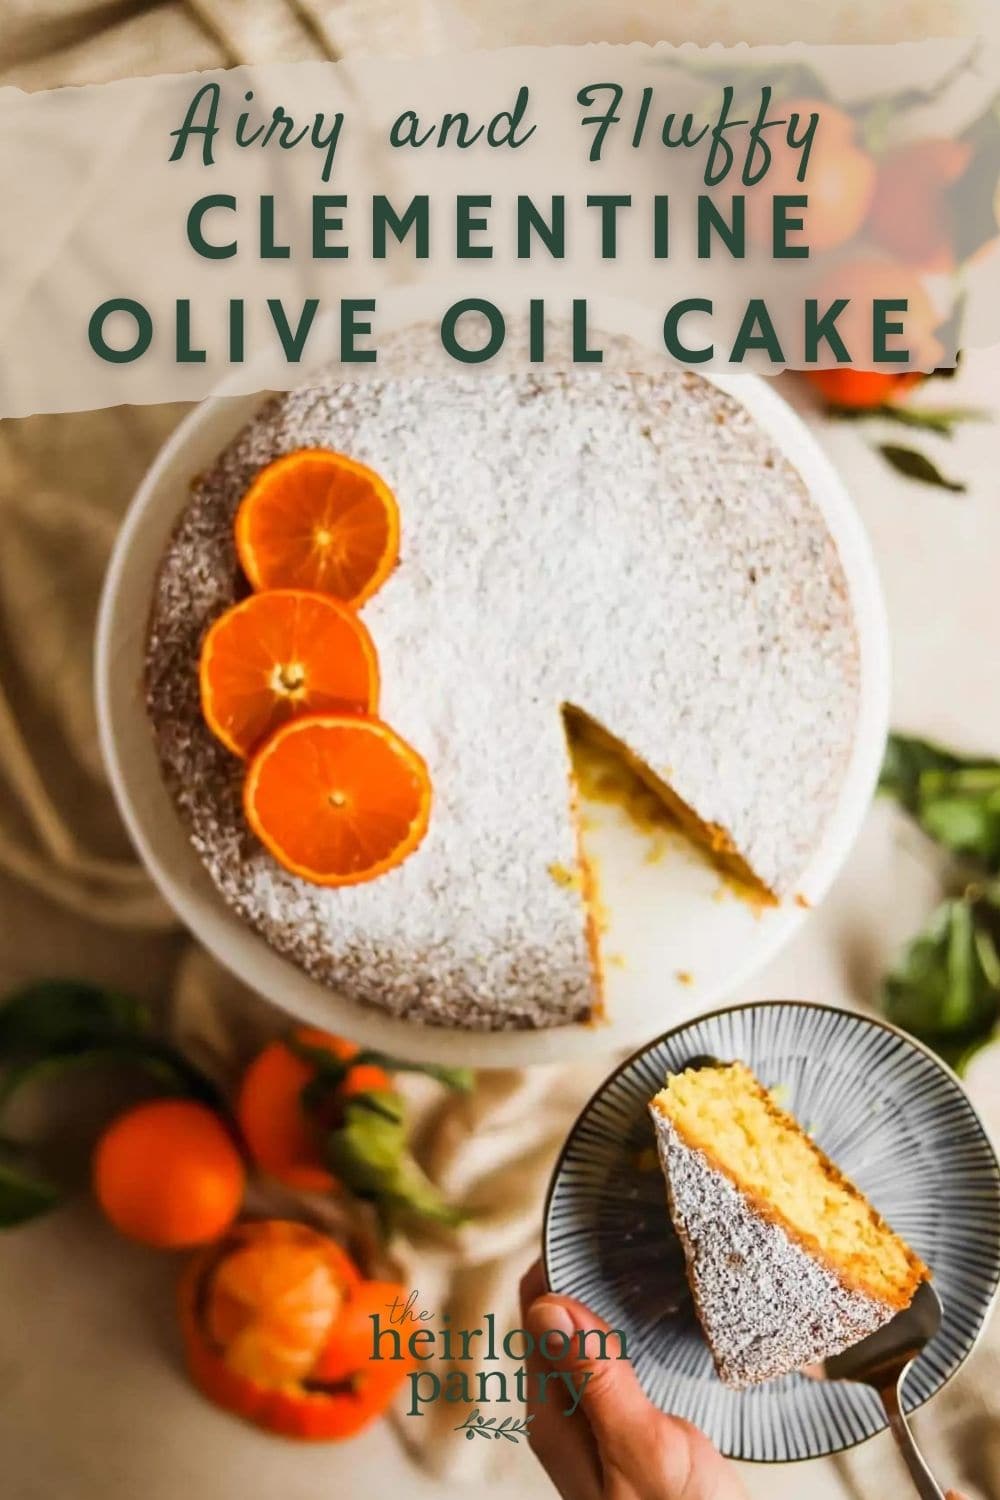 Clementine Olive Oil Cake - The Heirloom Pantry Pinterest